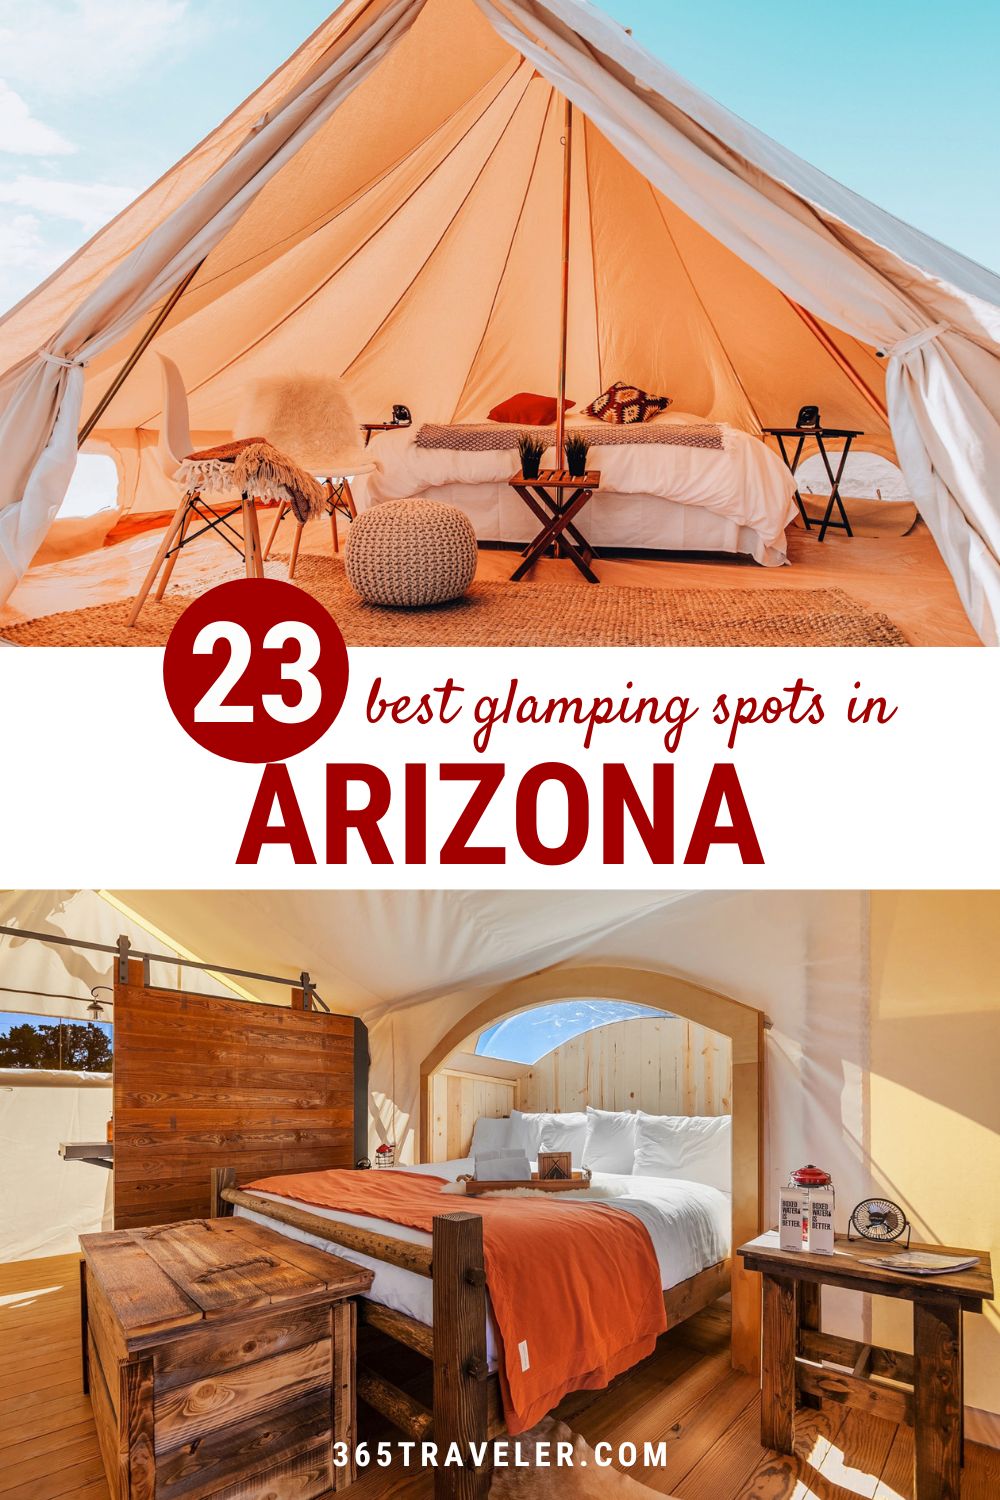 GLAMPING ARIZONA: 23 BEST SPOTS YOU'VE GOT TO SEE